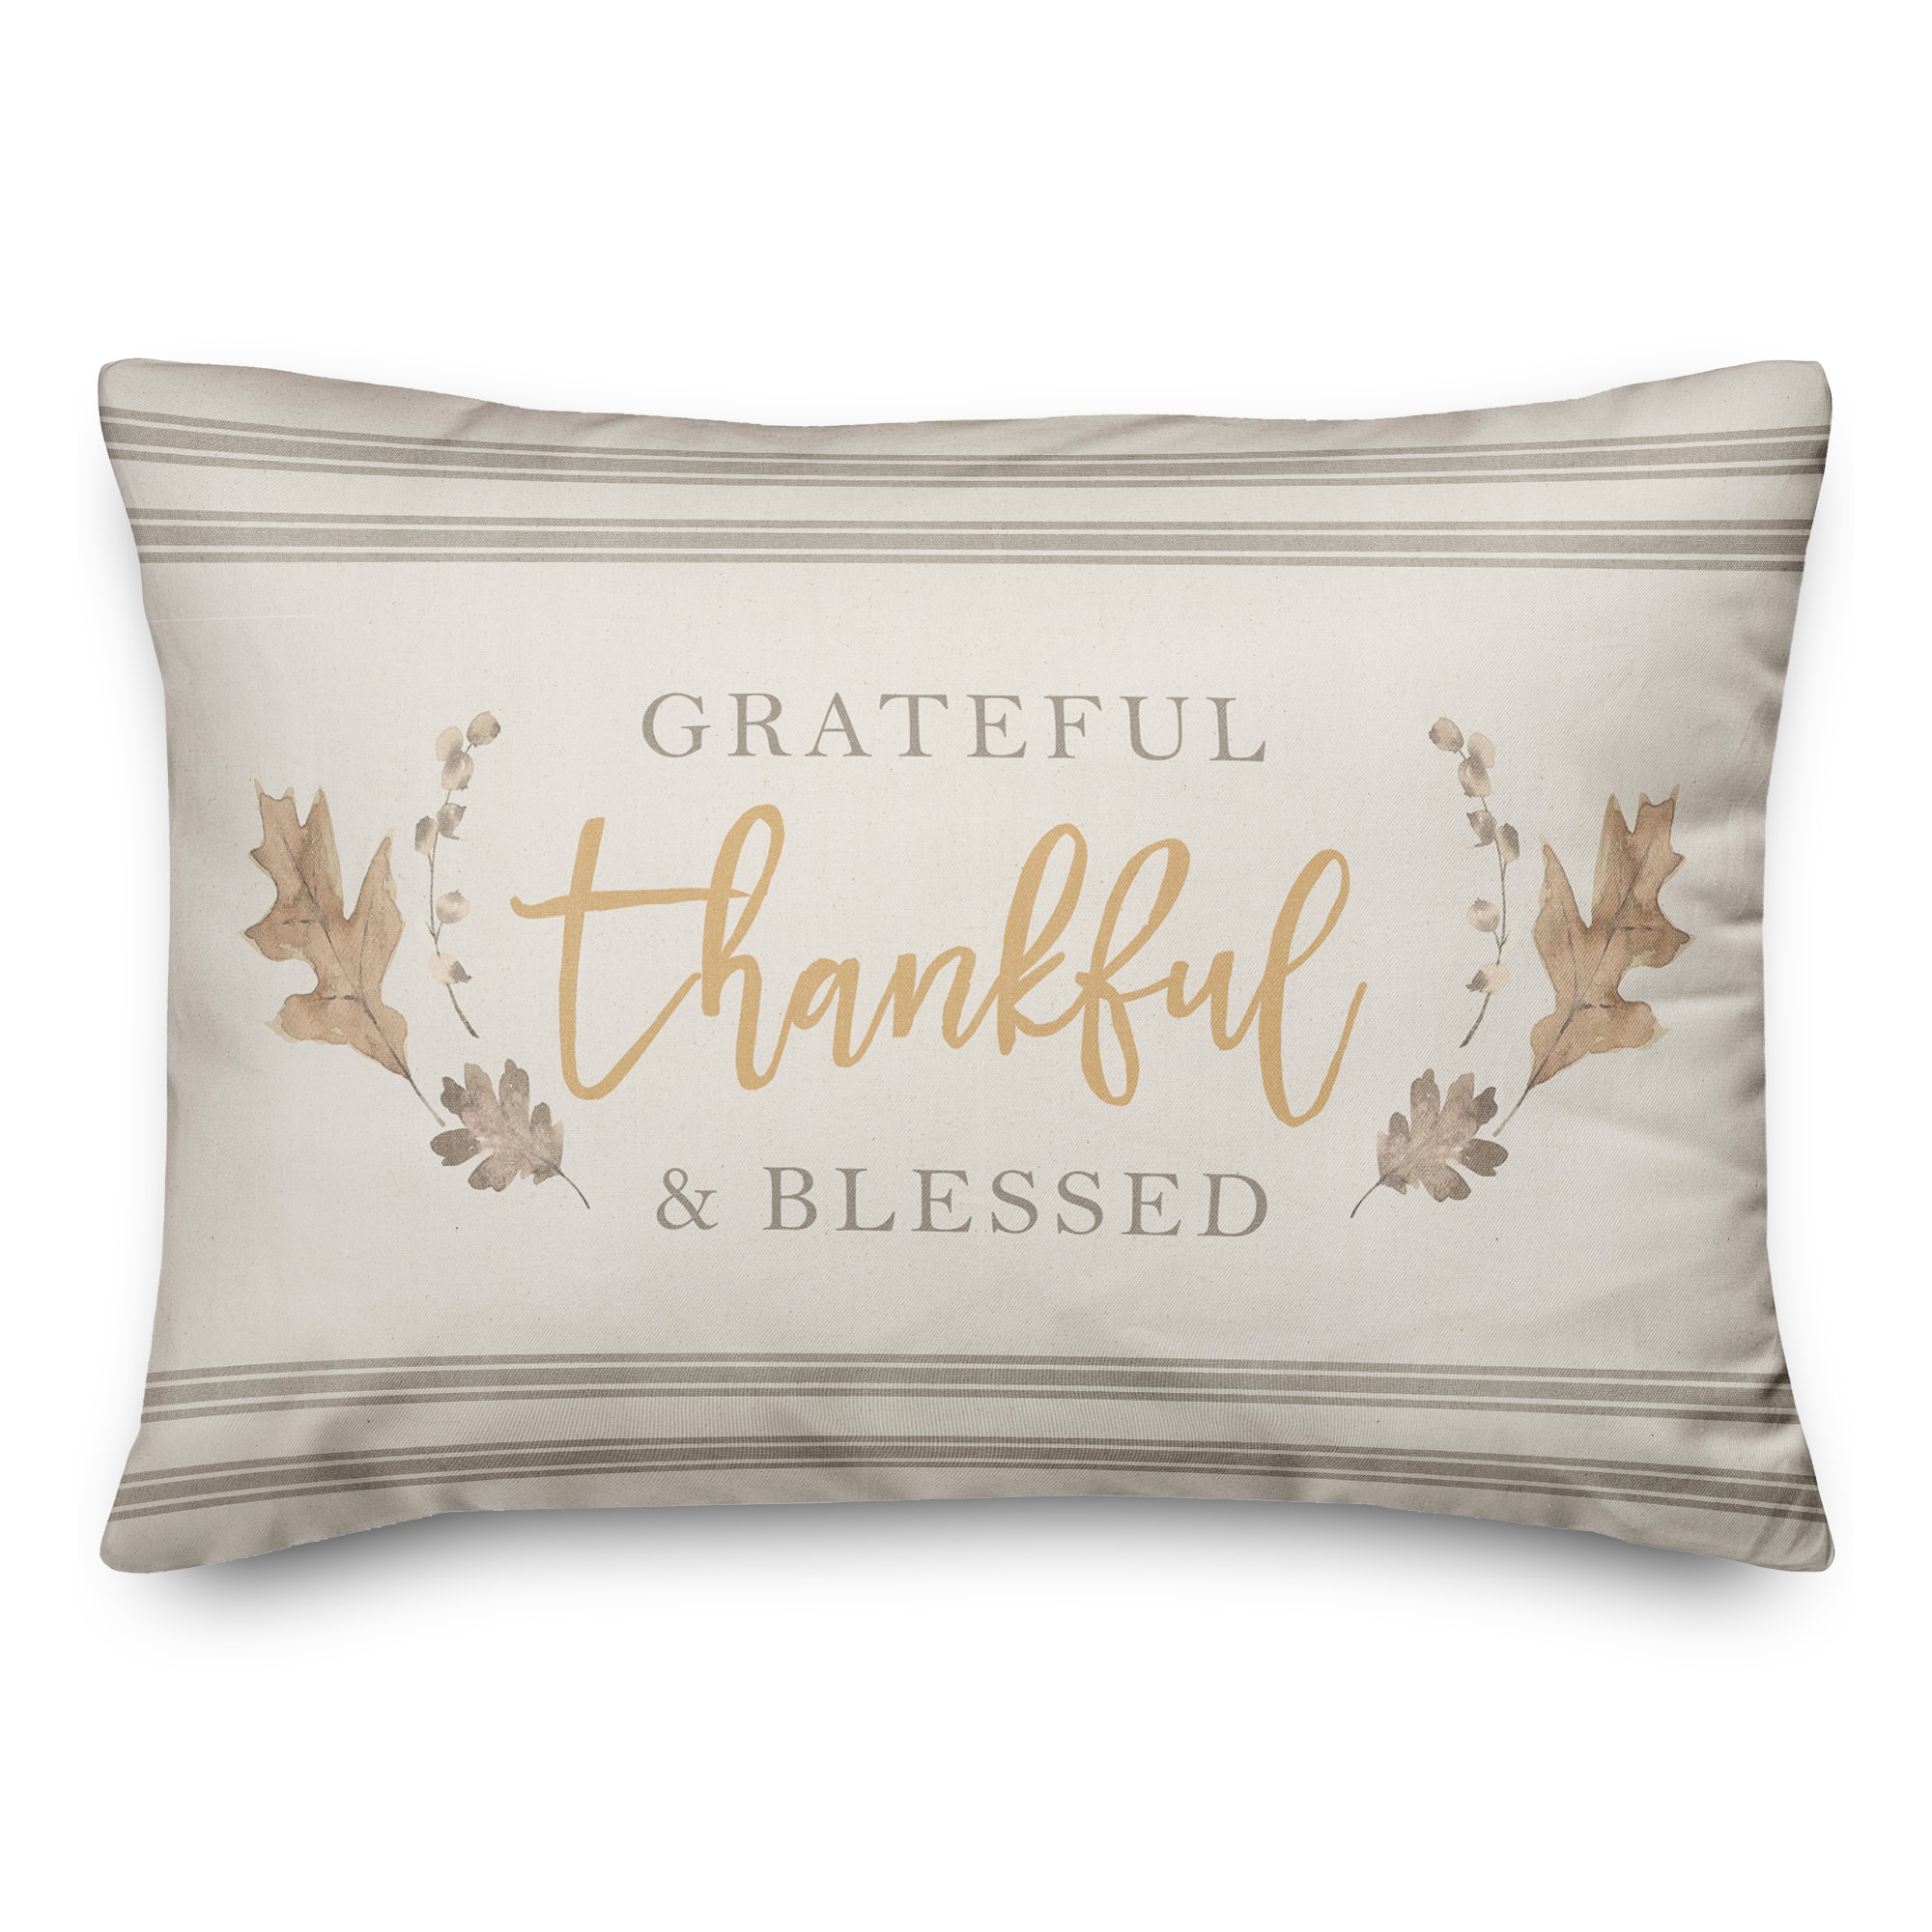 Grateful Thankful Blessed Stripes Indoor/Outdoor Pillow